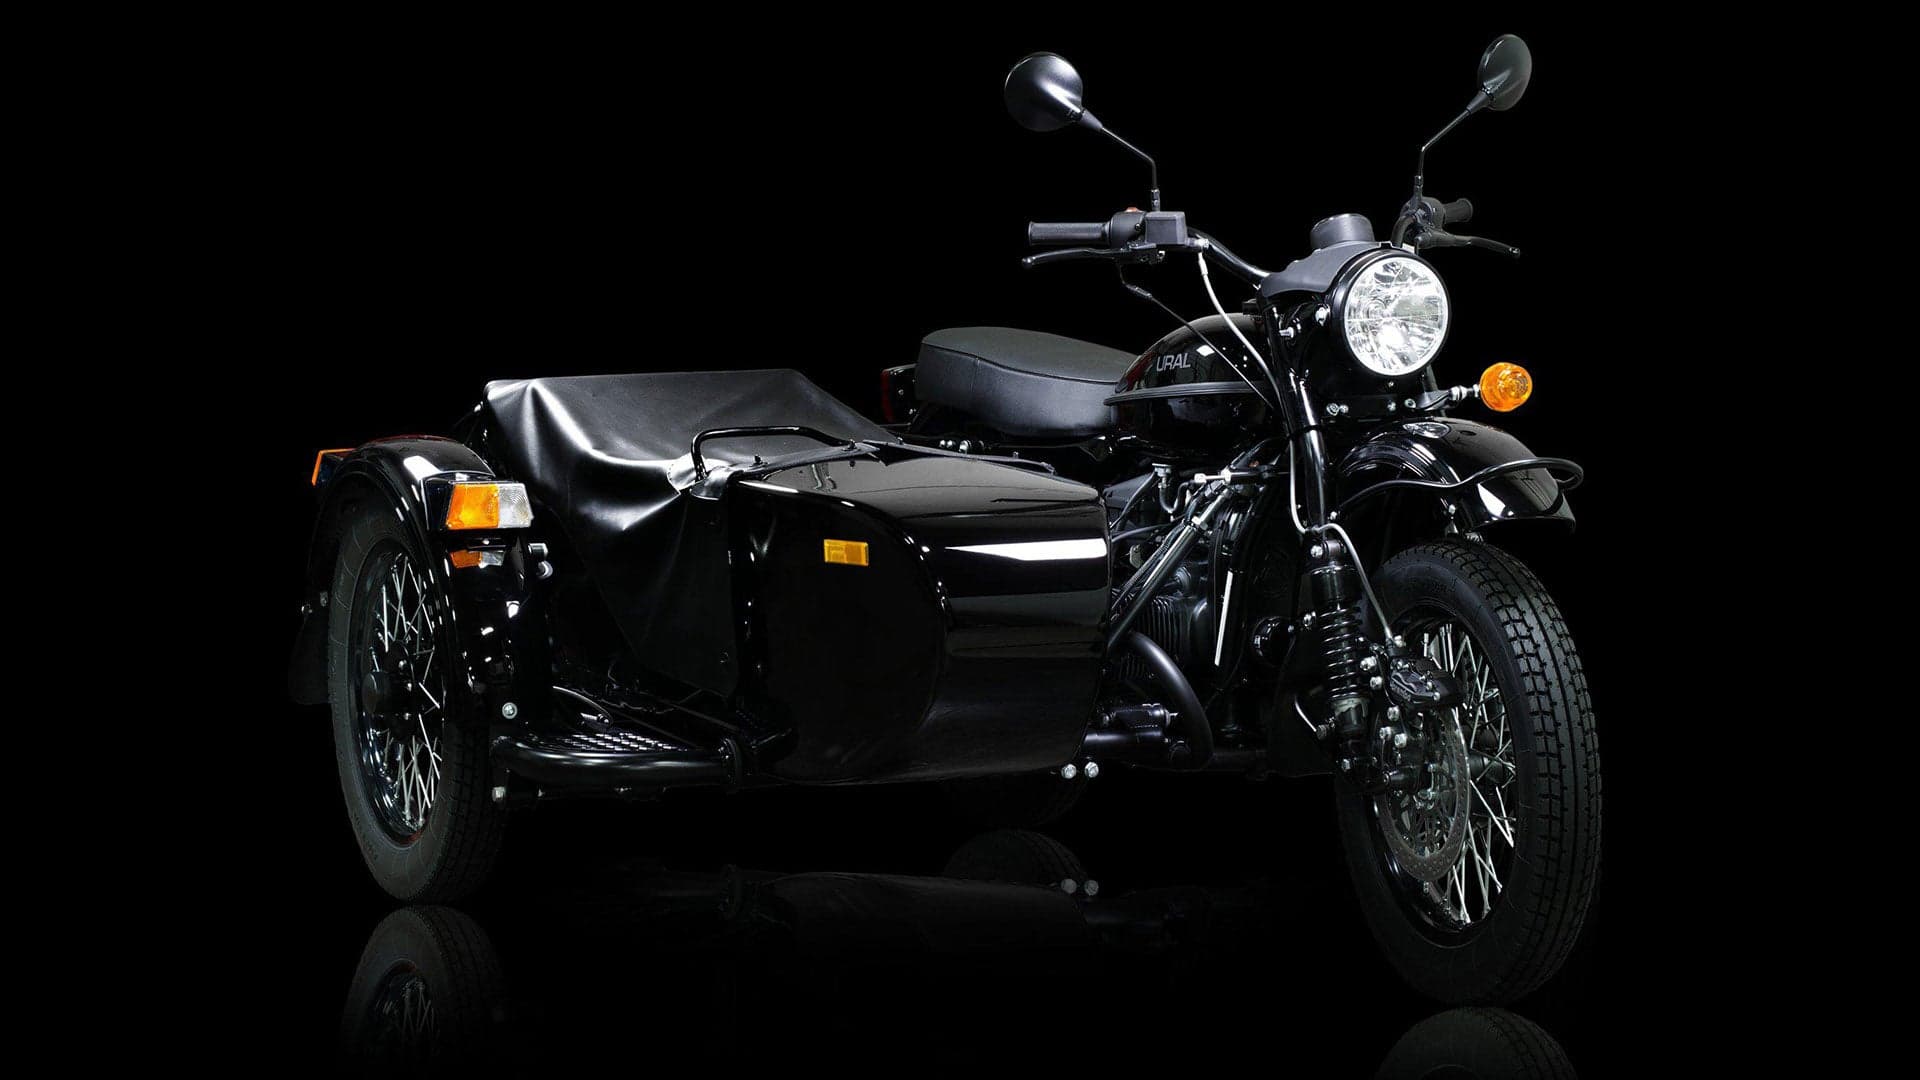 Darth Putin Would Ride This Star Wars Themed Russian Motorcycle